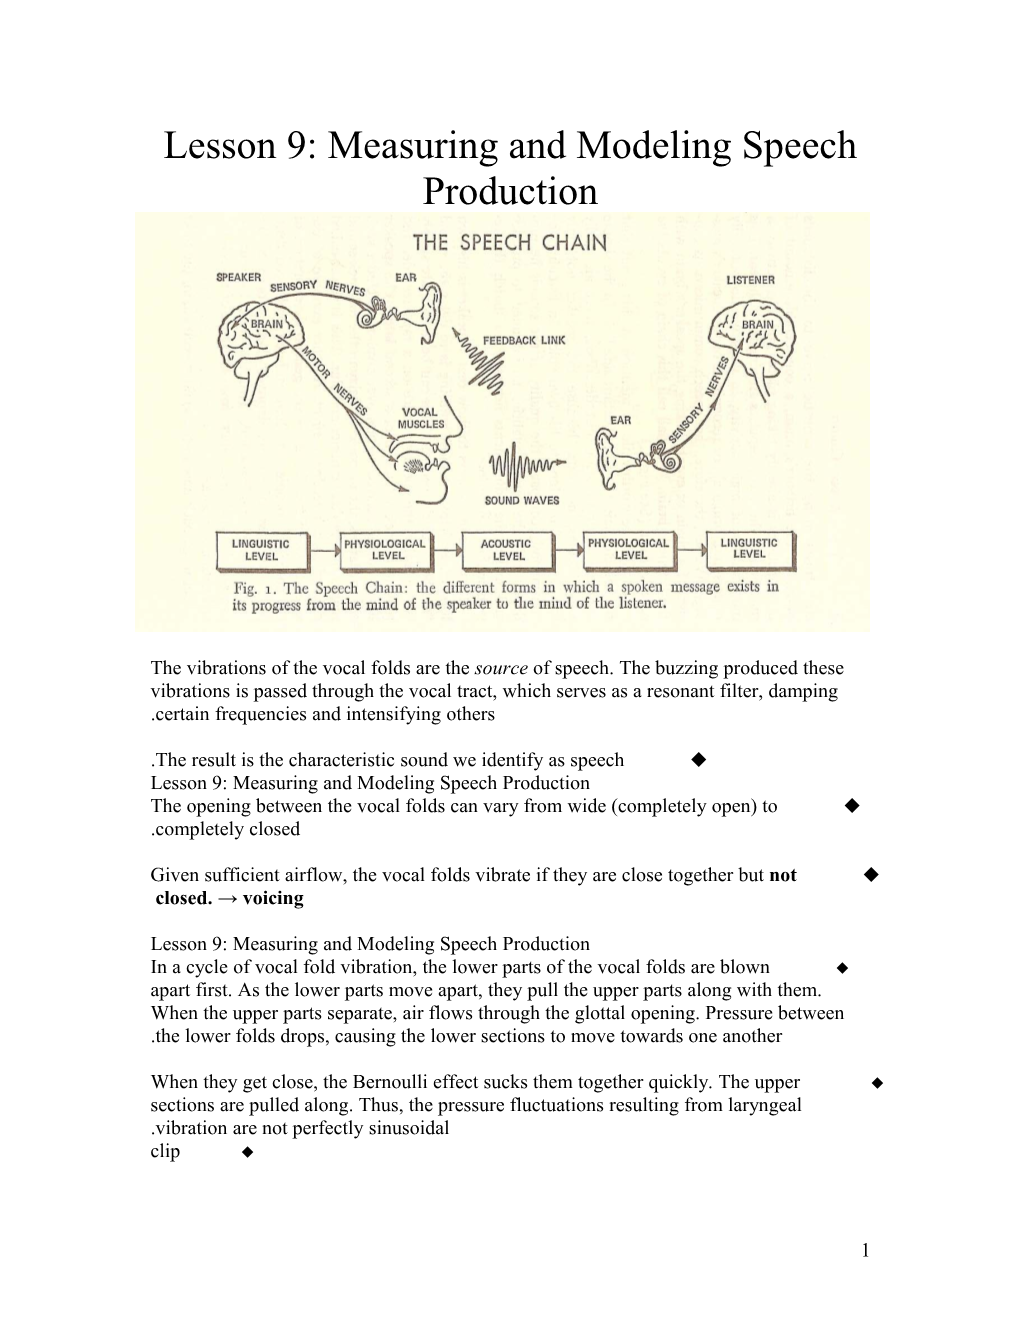 Lesson 9: Measuring and Modeling Speech Production